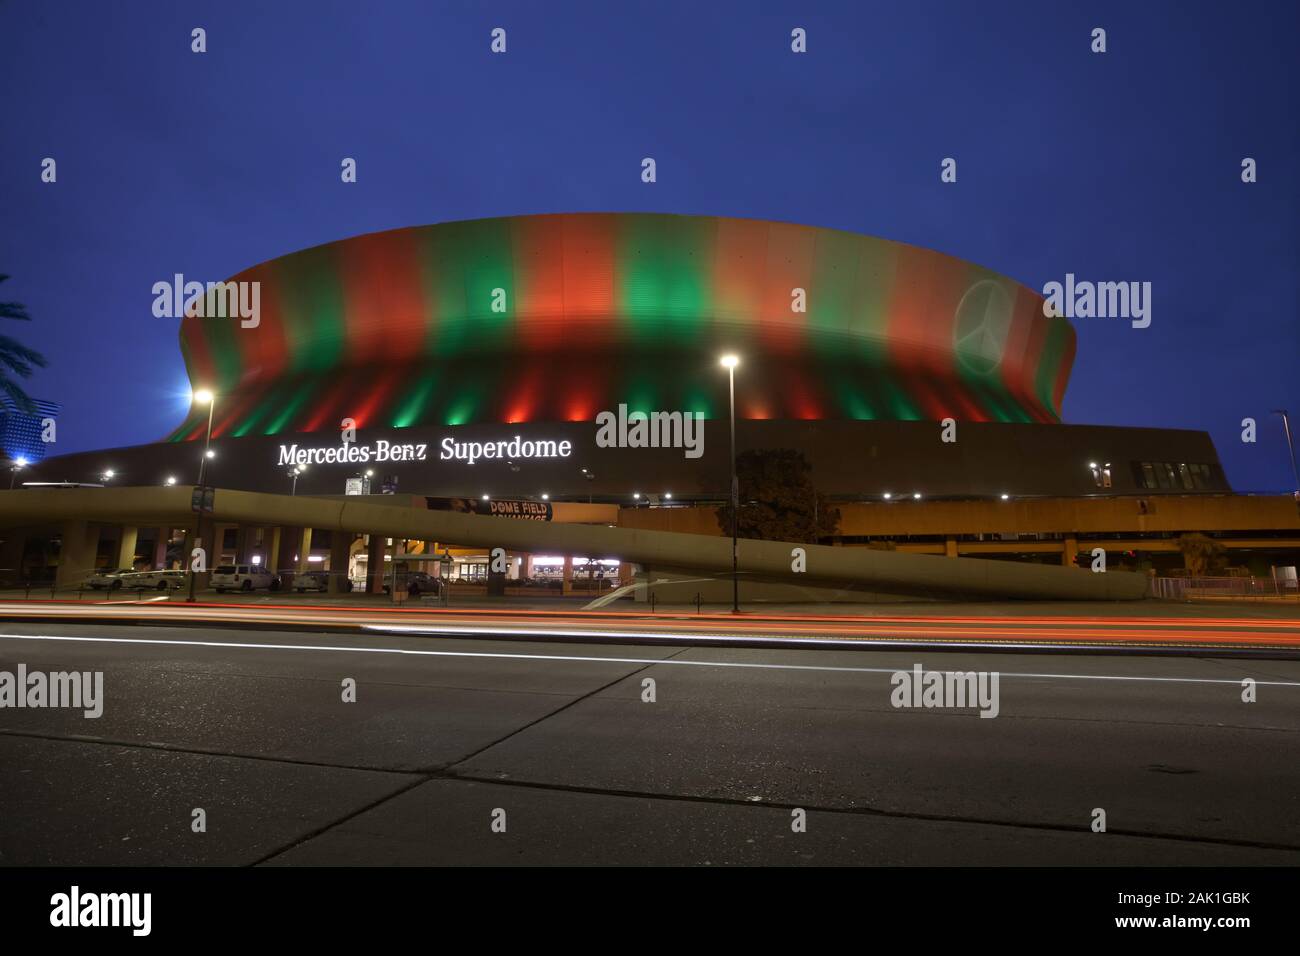 The Superdome in New Orleans, Louisiana Stock Photo